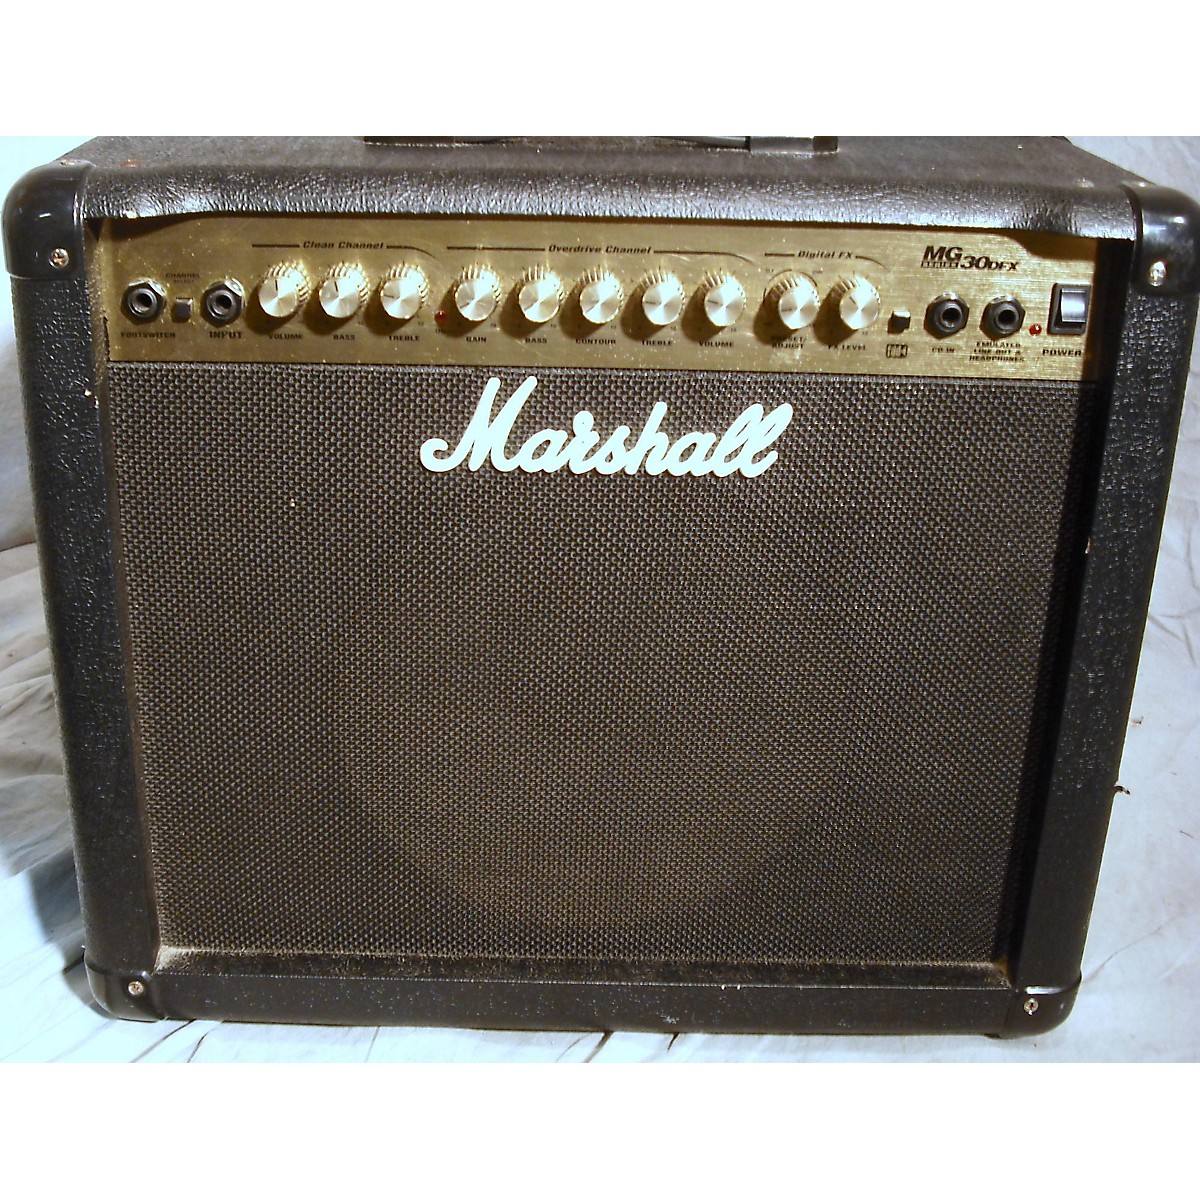 Used Marshall Mg30dfx 1x10 30w Guitar Combo Amp Guitar Center